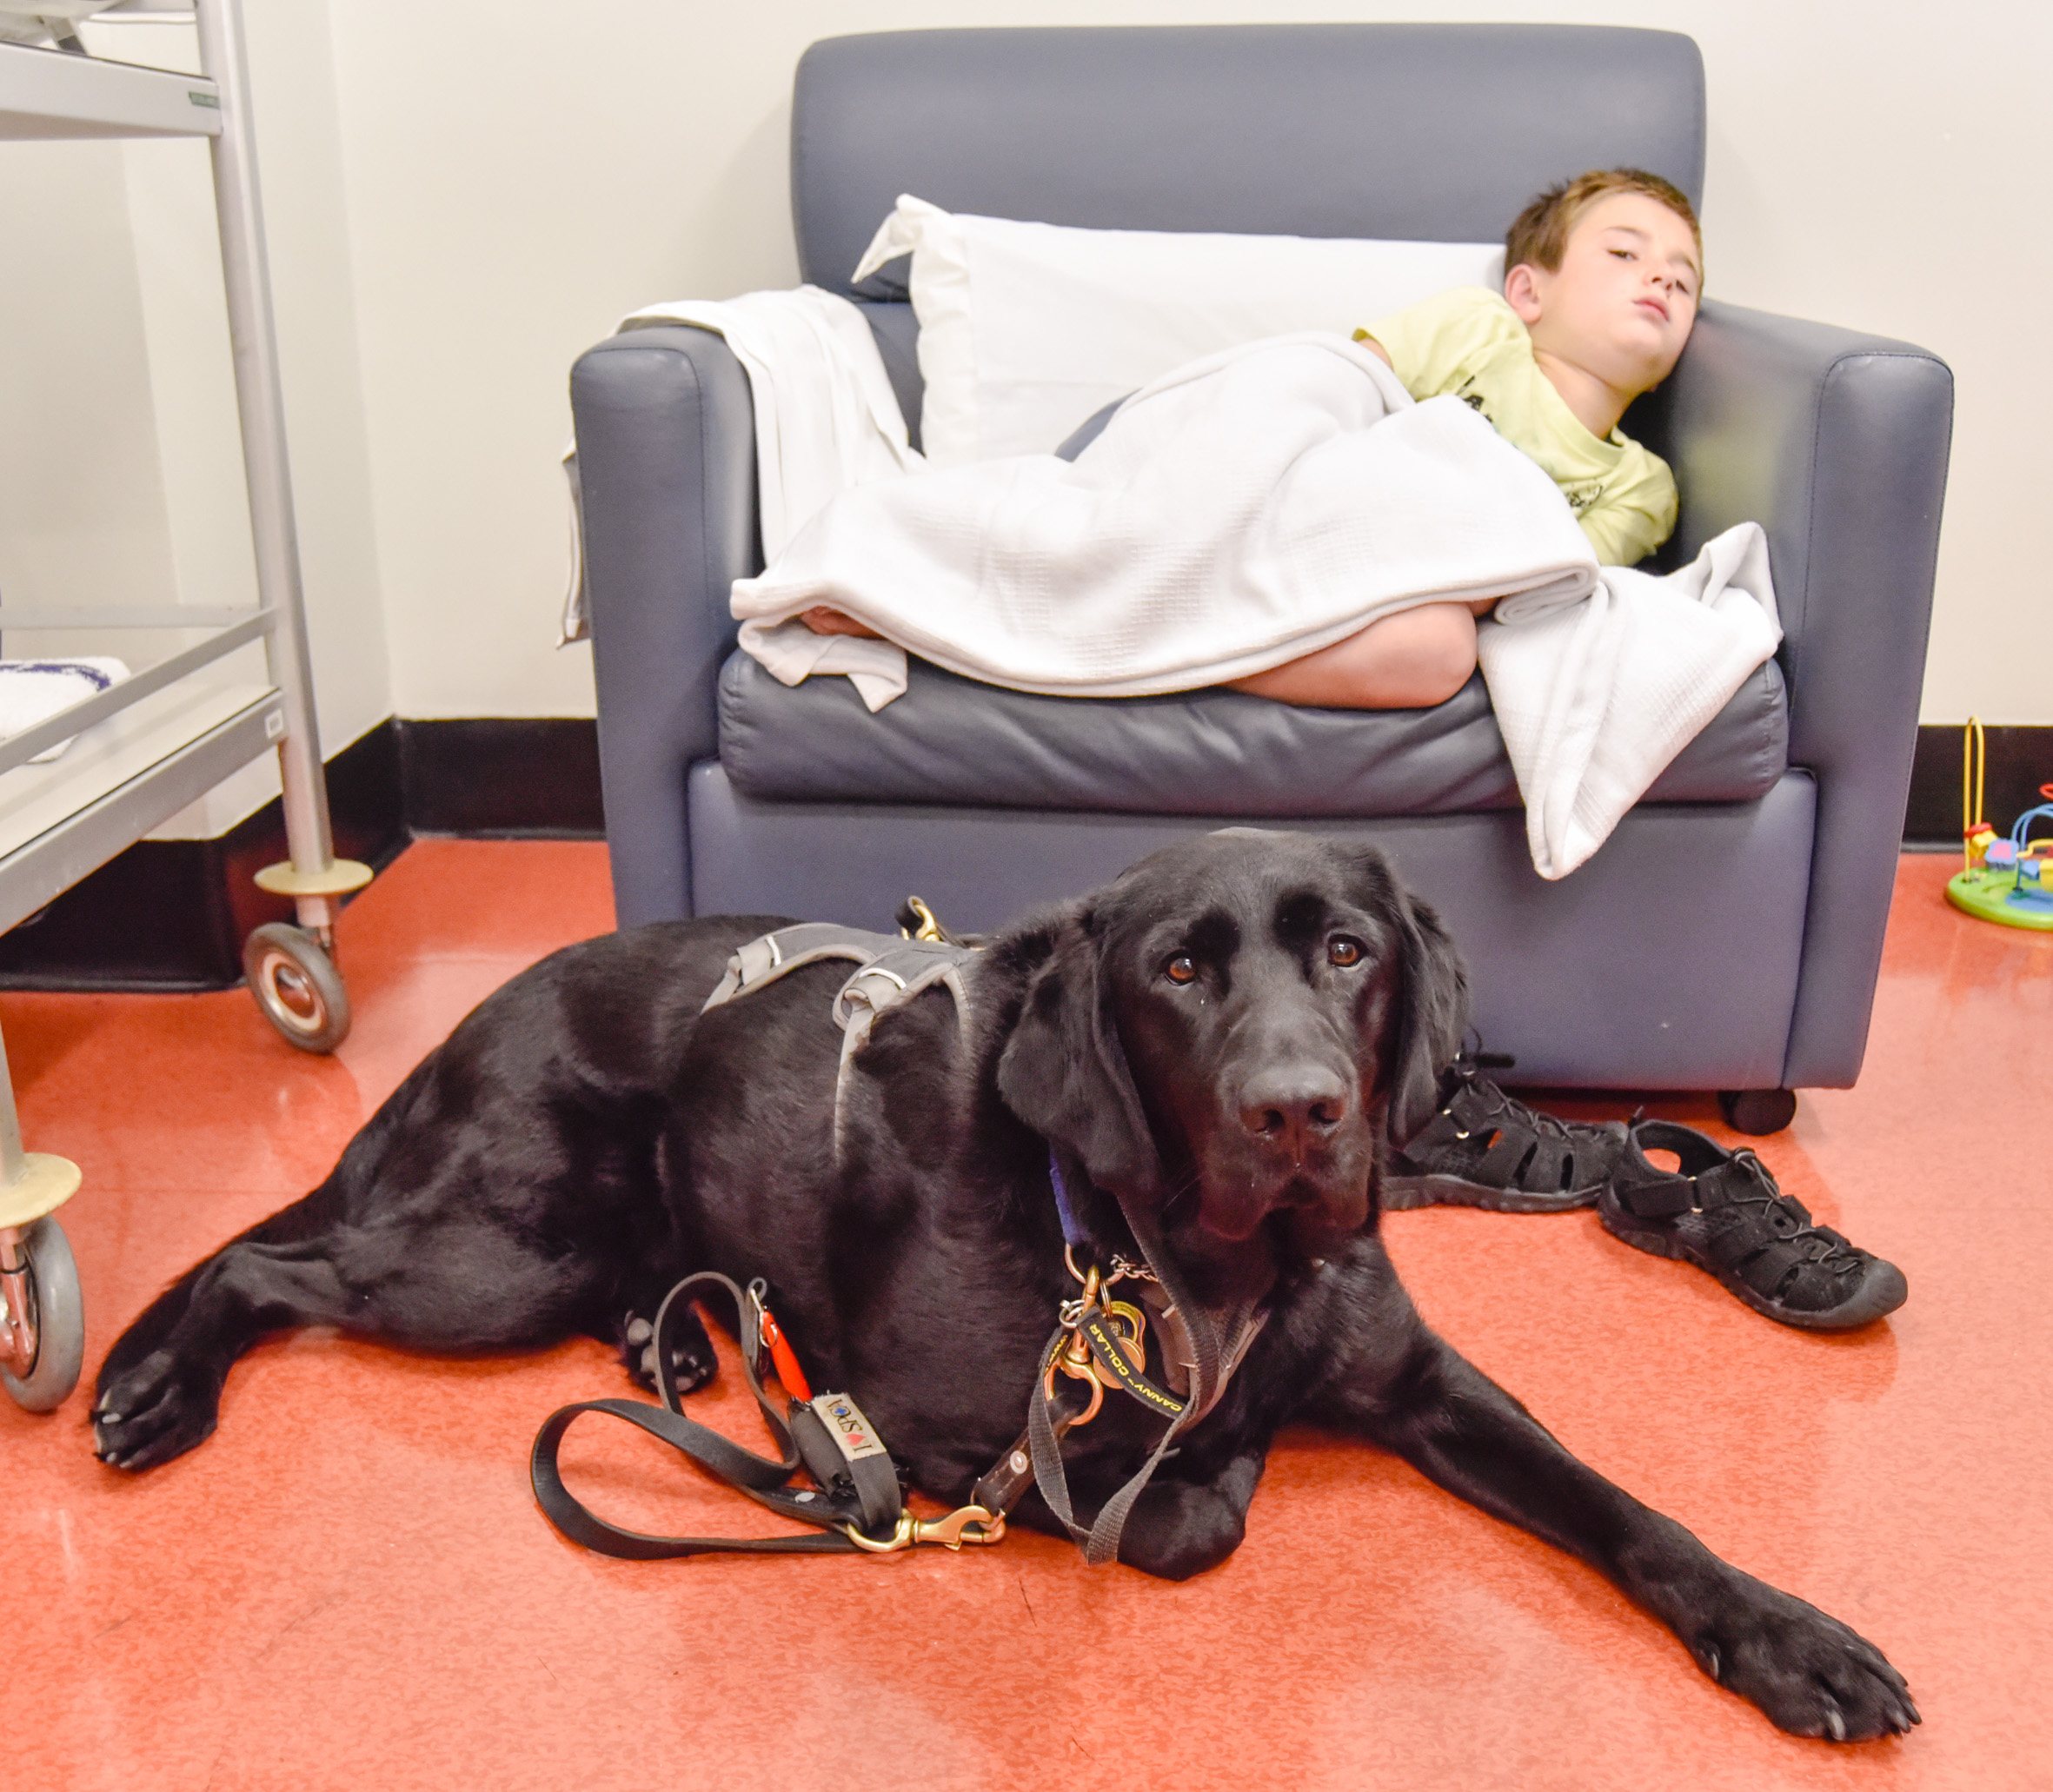 PHOTO: Mahe, an assistance dog, accompanied 9-year-old James Isaac at Wellington Children's Hospital in New Zealand, where he underwent an MRI scan to diagnose the cause of his seizures. 